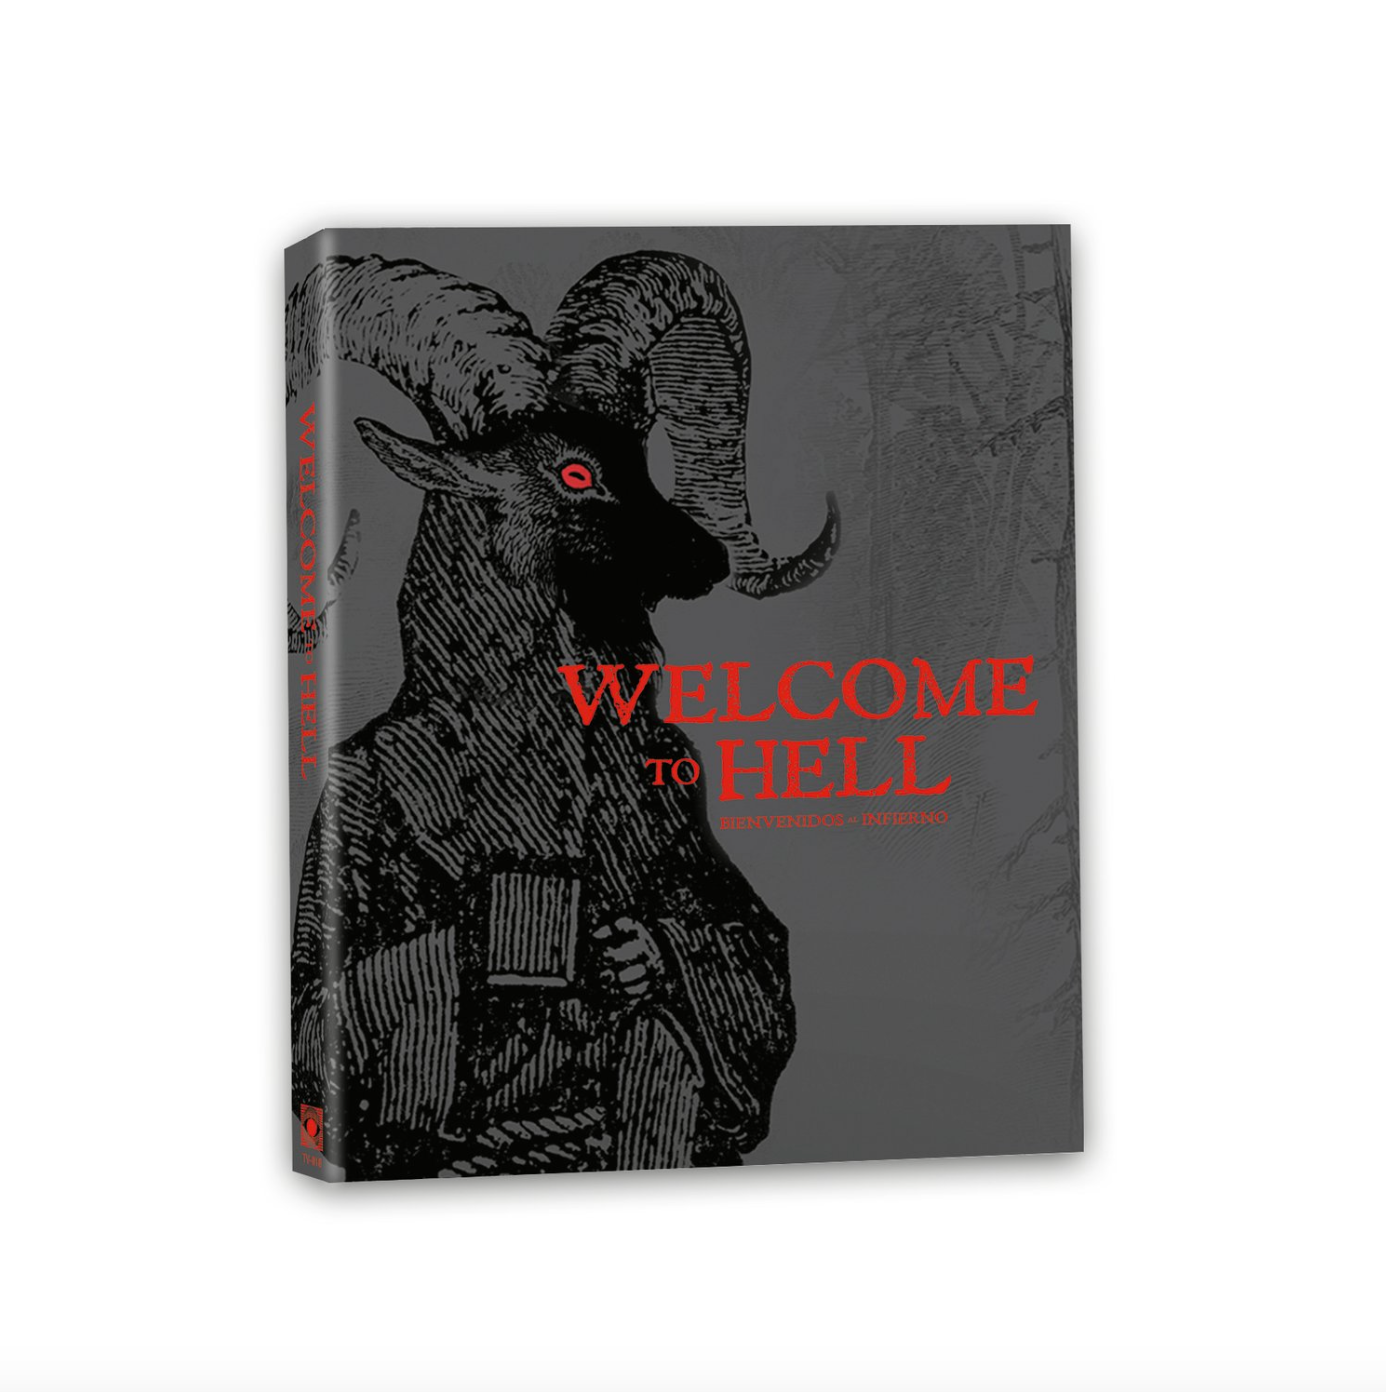 Welcome to Hell blu-ray with slip